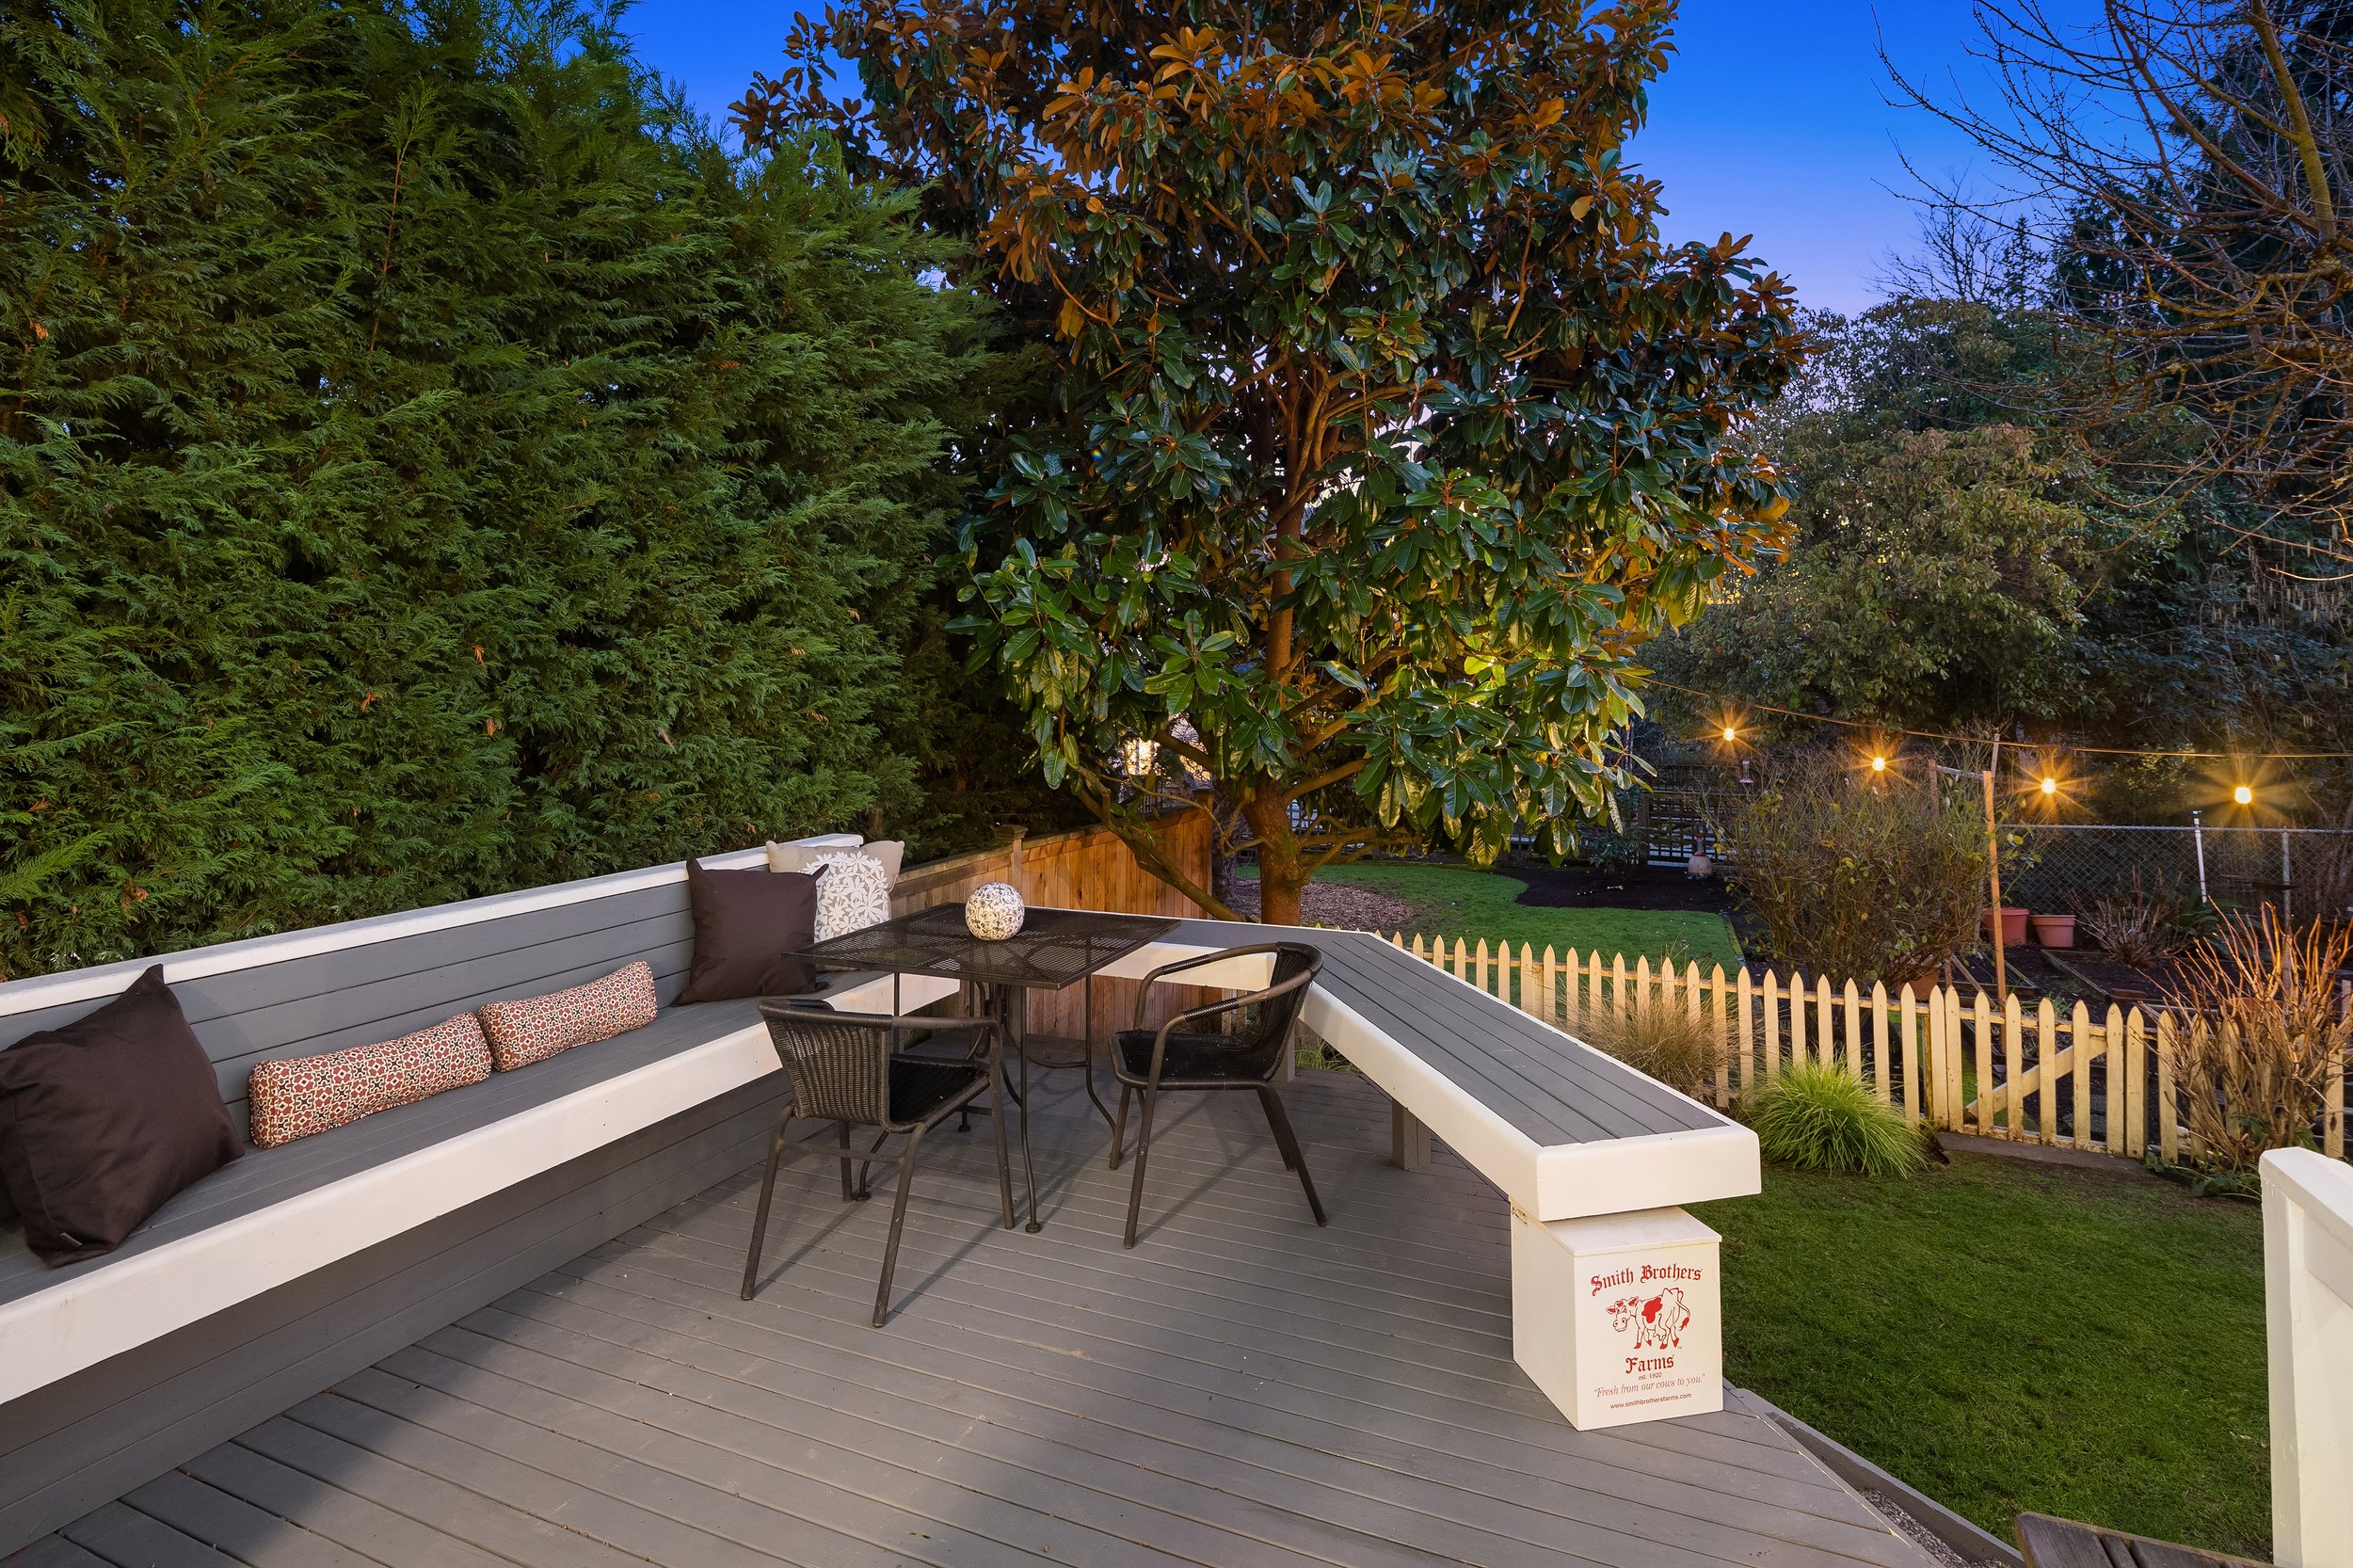  Deck off the kitchen ensures indoor|outdoor living comes full circle, offering inviting spaces for dining al fresco. 